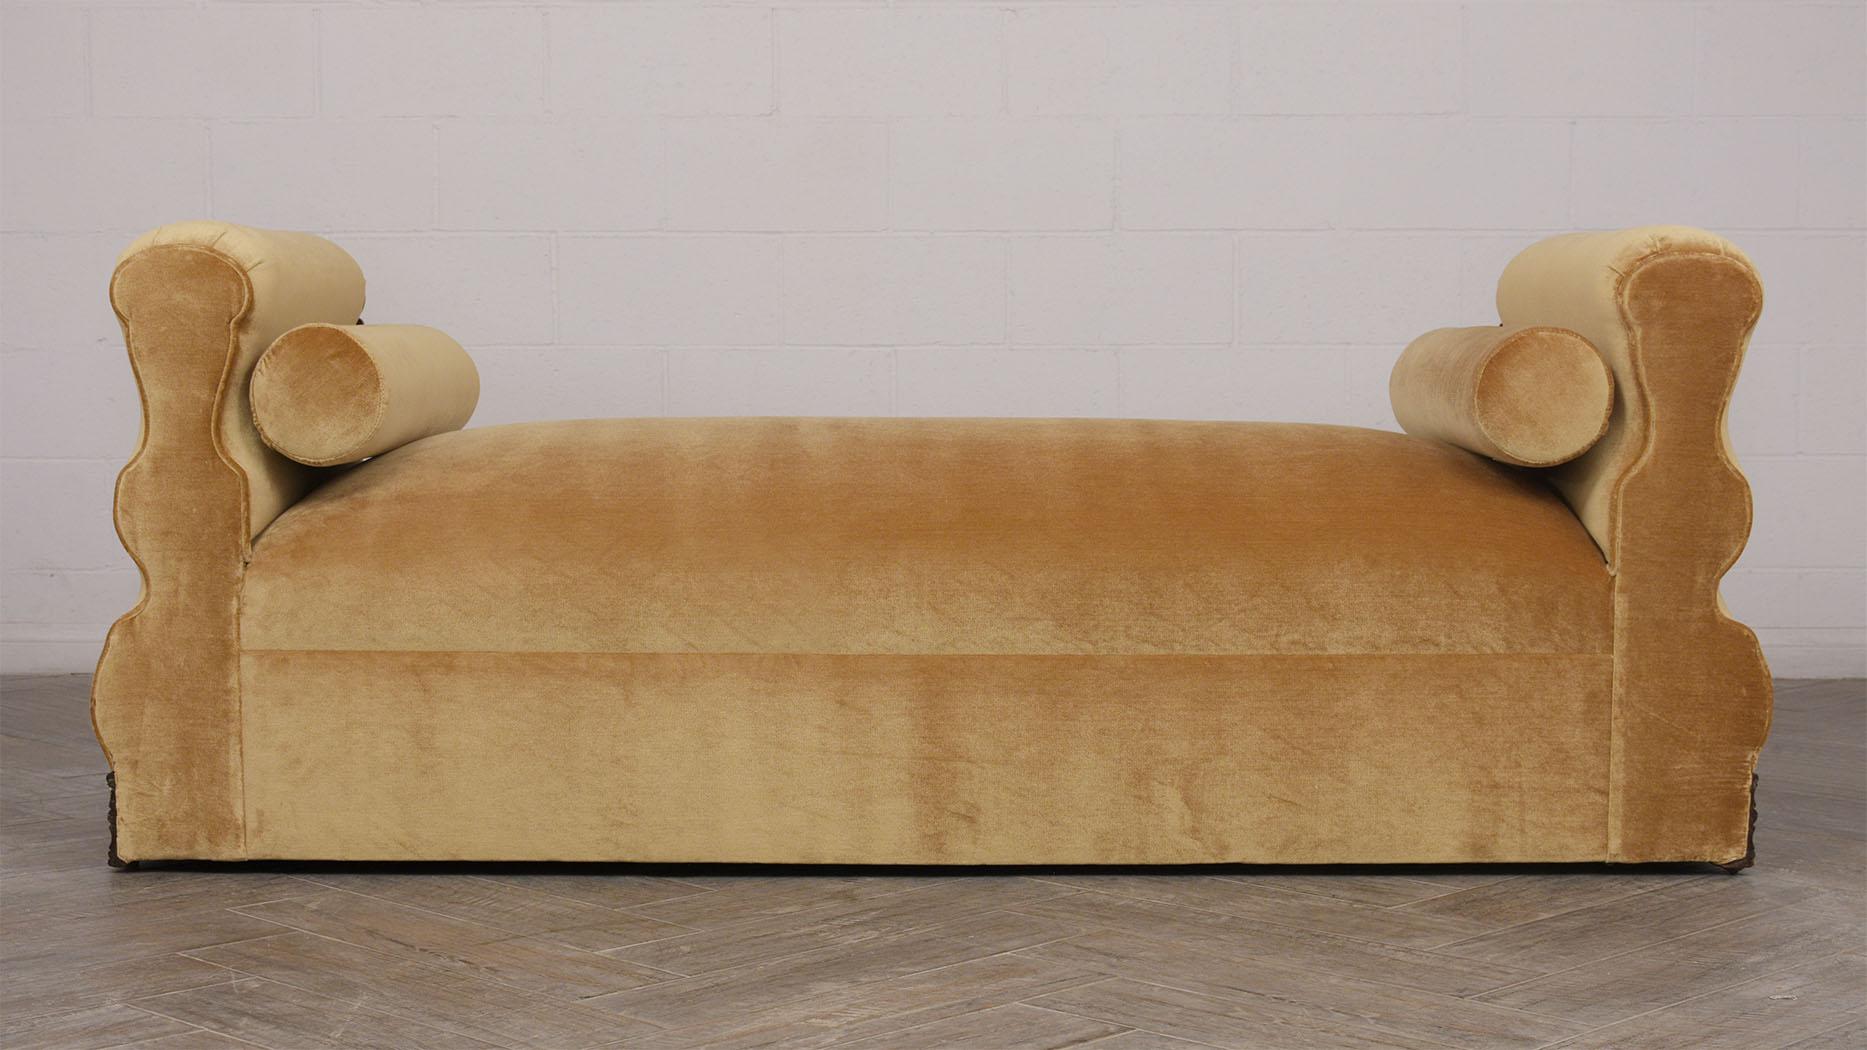 Hand-Carved Restored 19th Century Regency Style Daybed